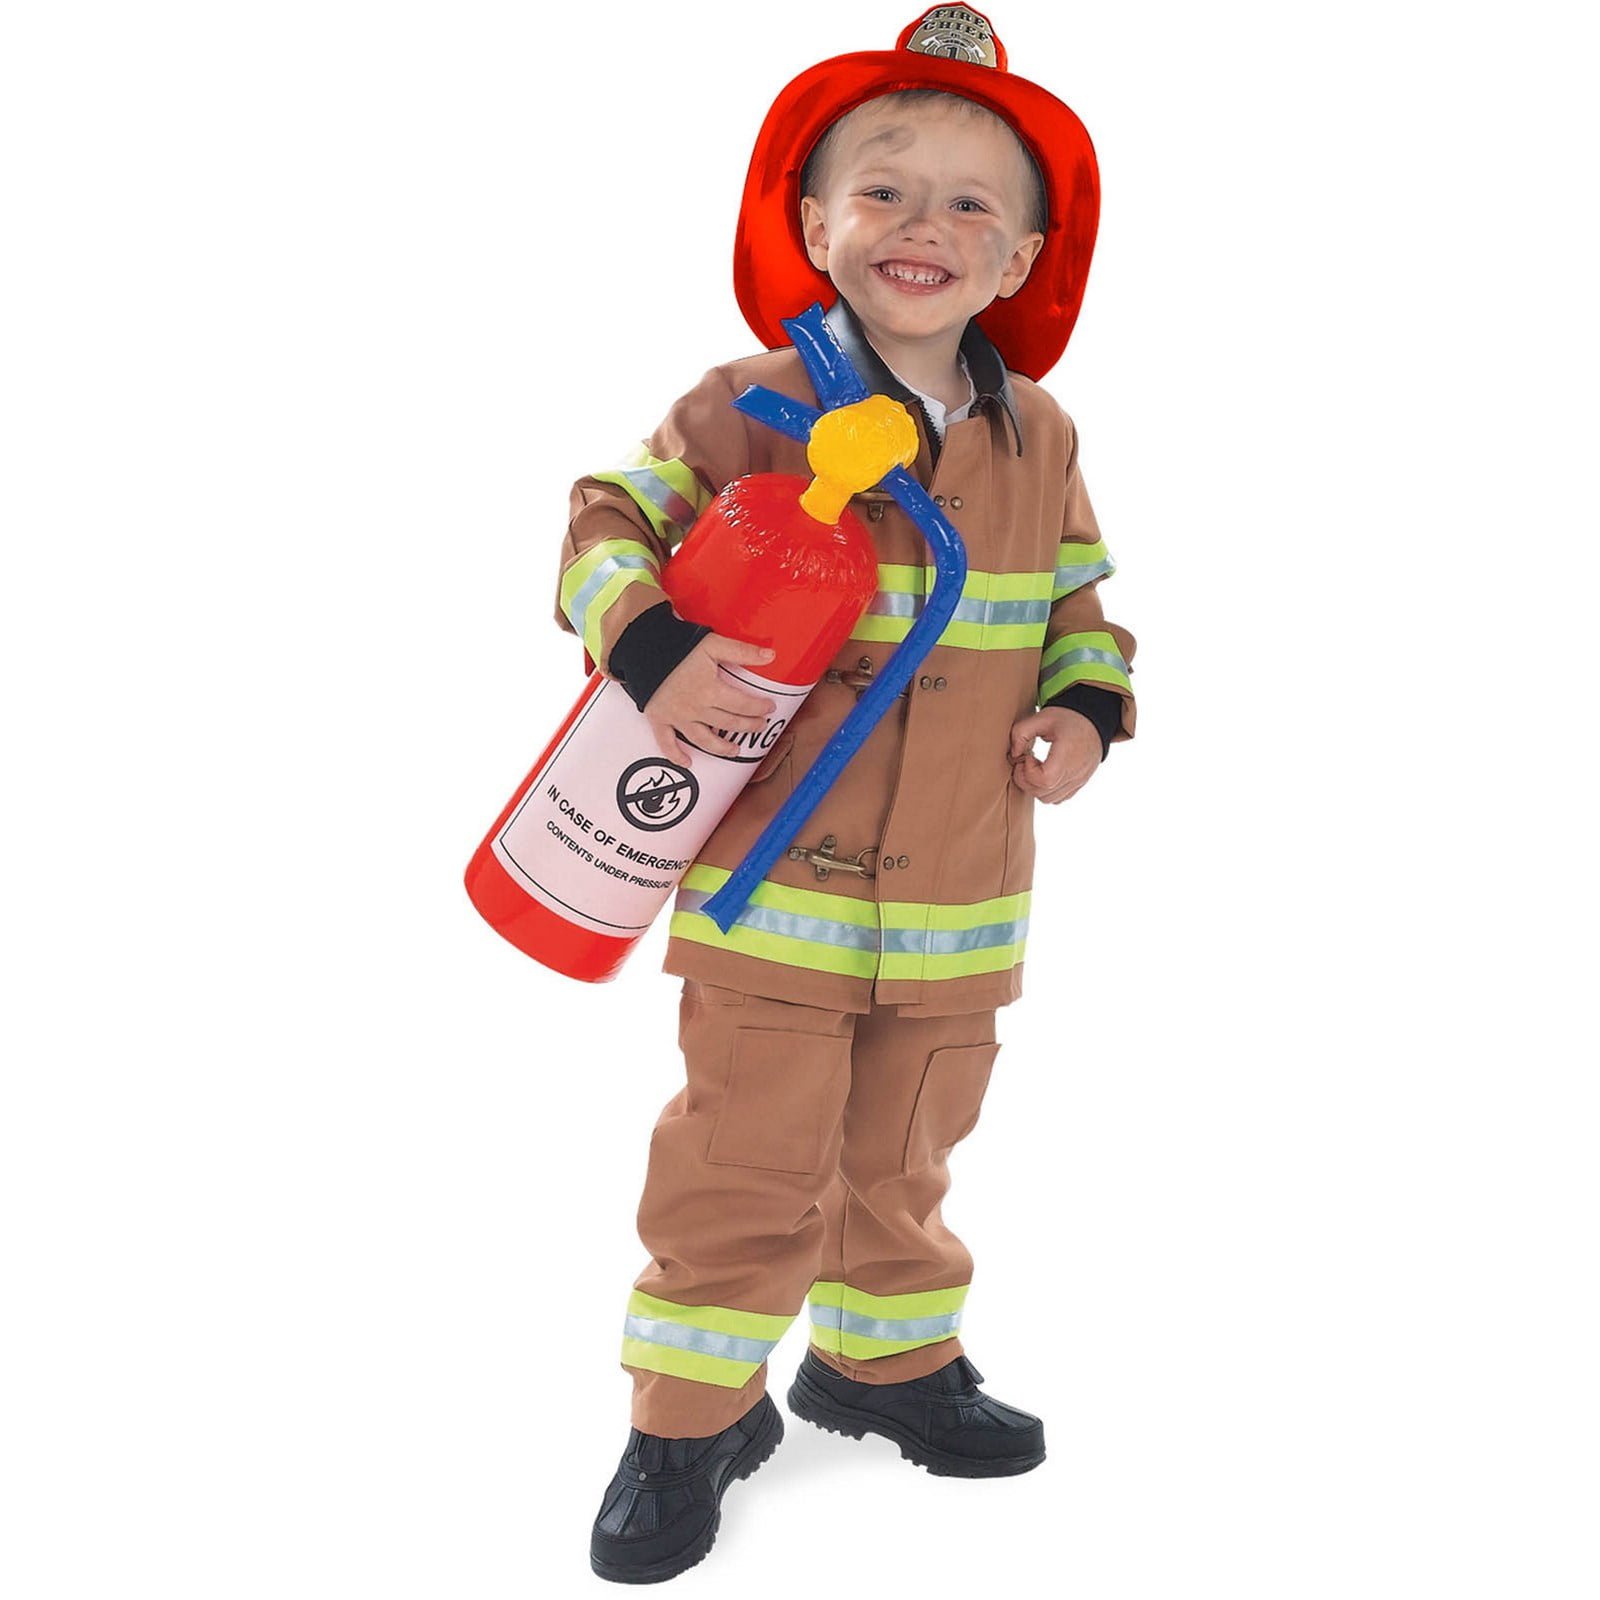 Fireman Fire Fighter Career Occupation Dress Up Halloween Child Costume 2 COLORS 